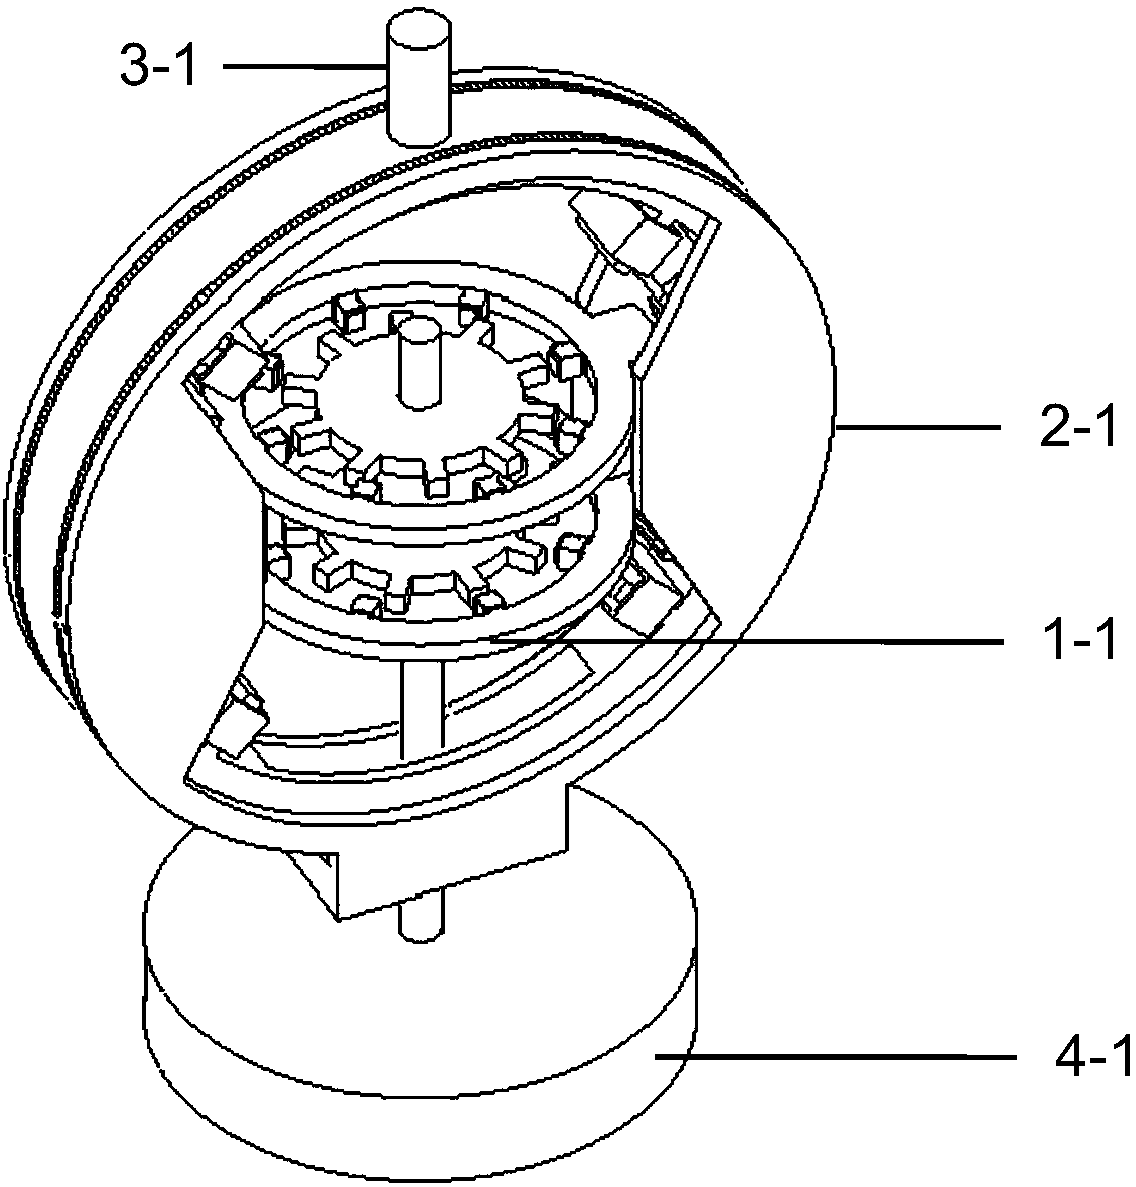 Two-degree-of-freedom hybrid stepping motor with orthogonal cylindrical structure for robots